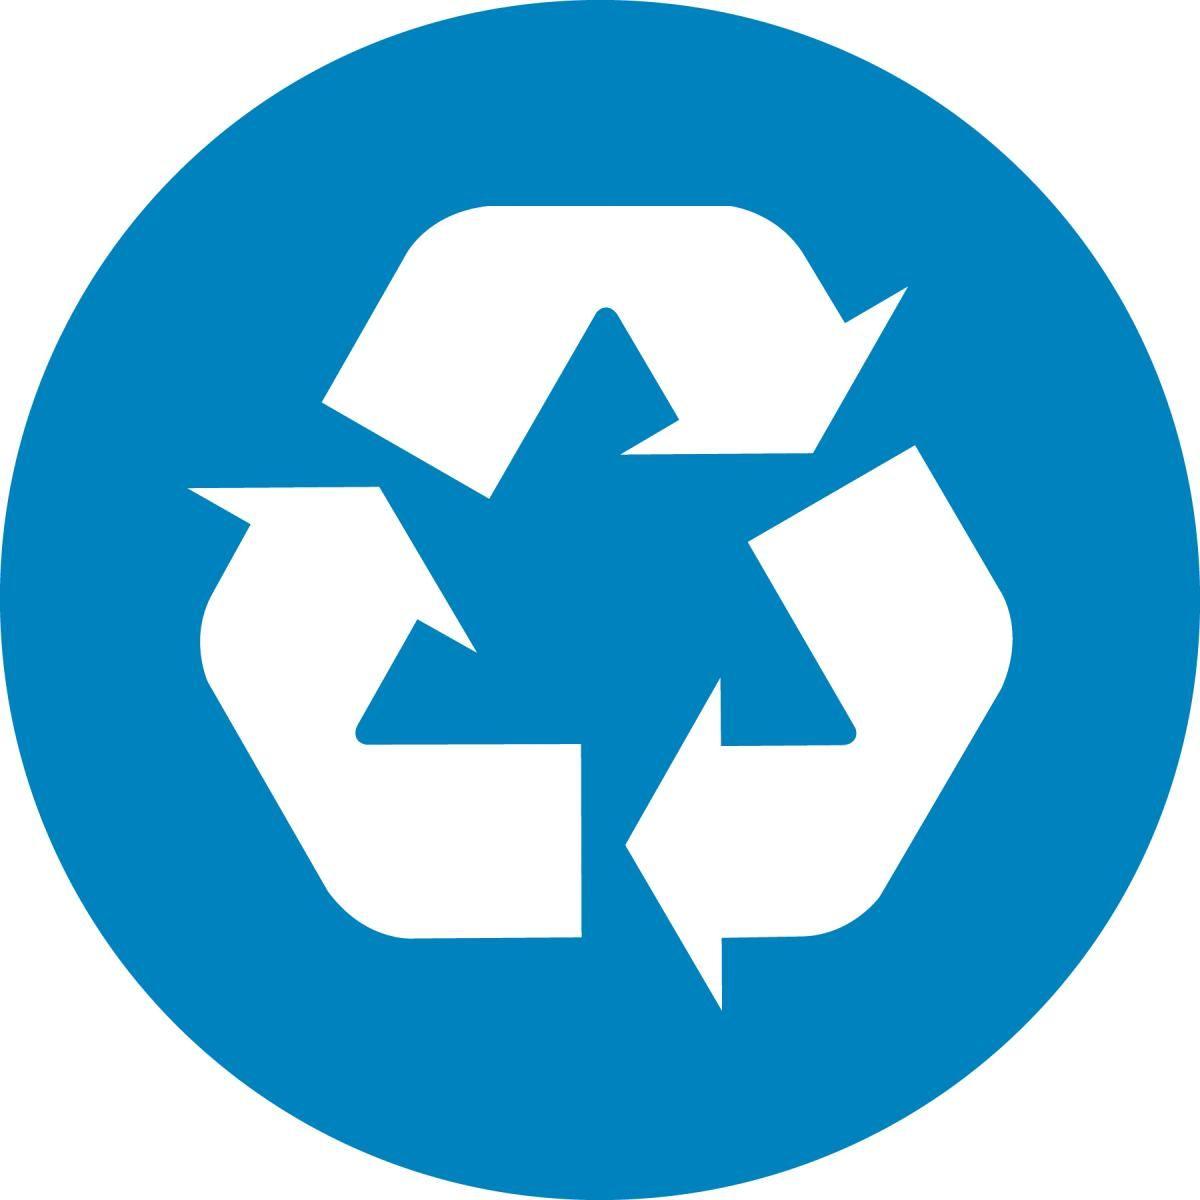 Mini Recycle Logo - Reasons to Recycle